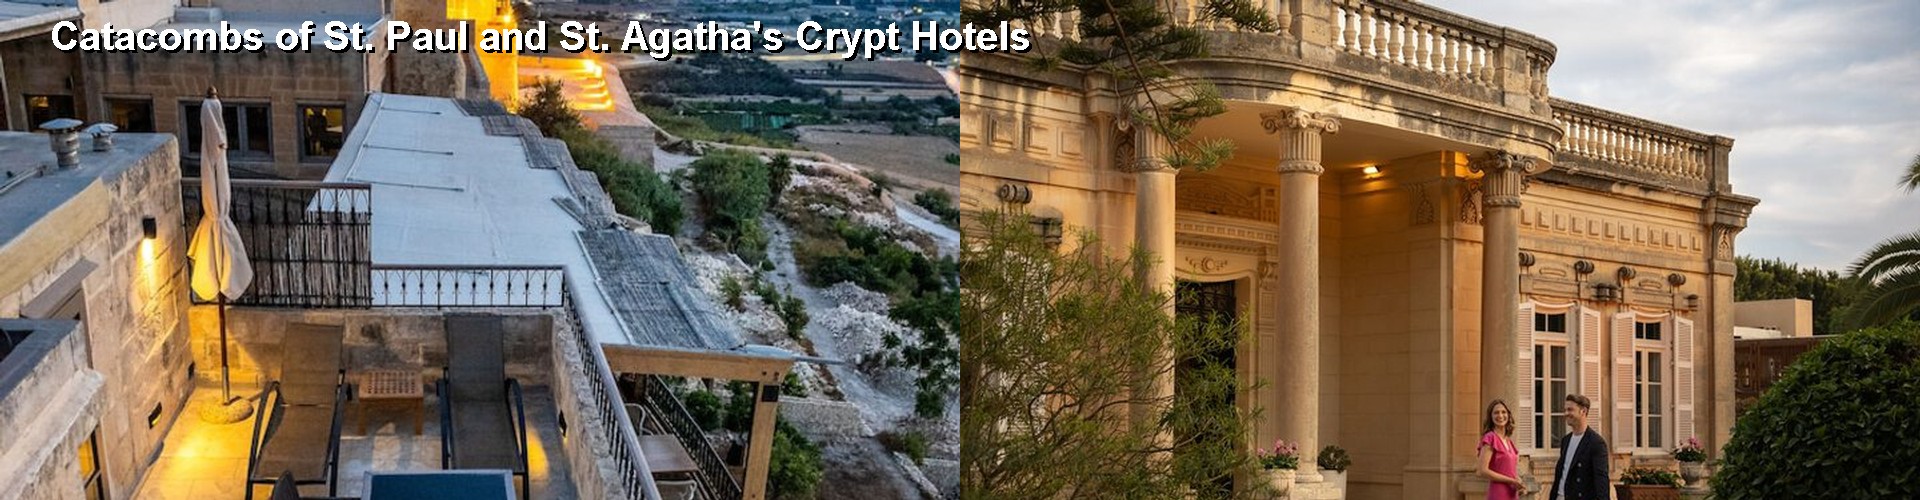 5 Best Hotels near Catacombs of St. Paul and St. Agatha's Crypt